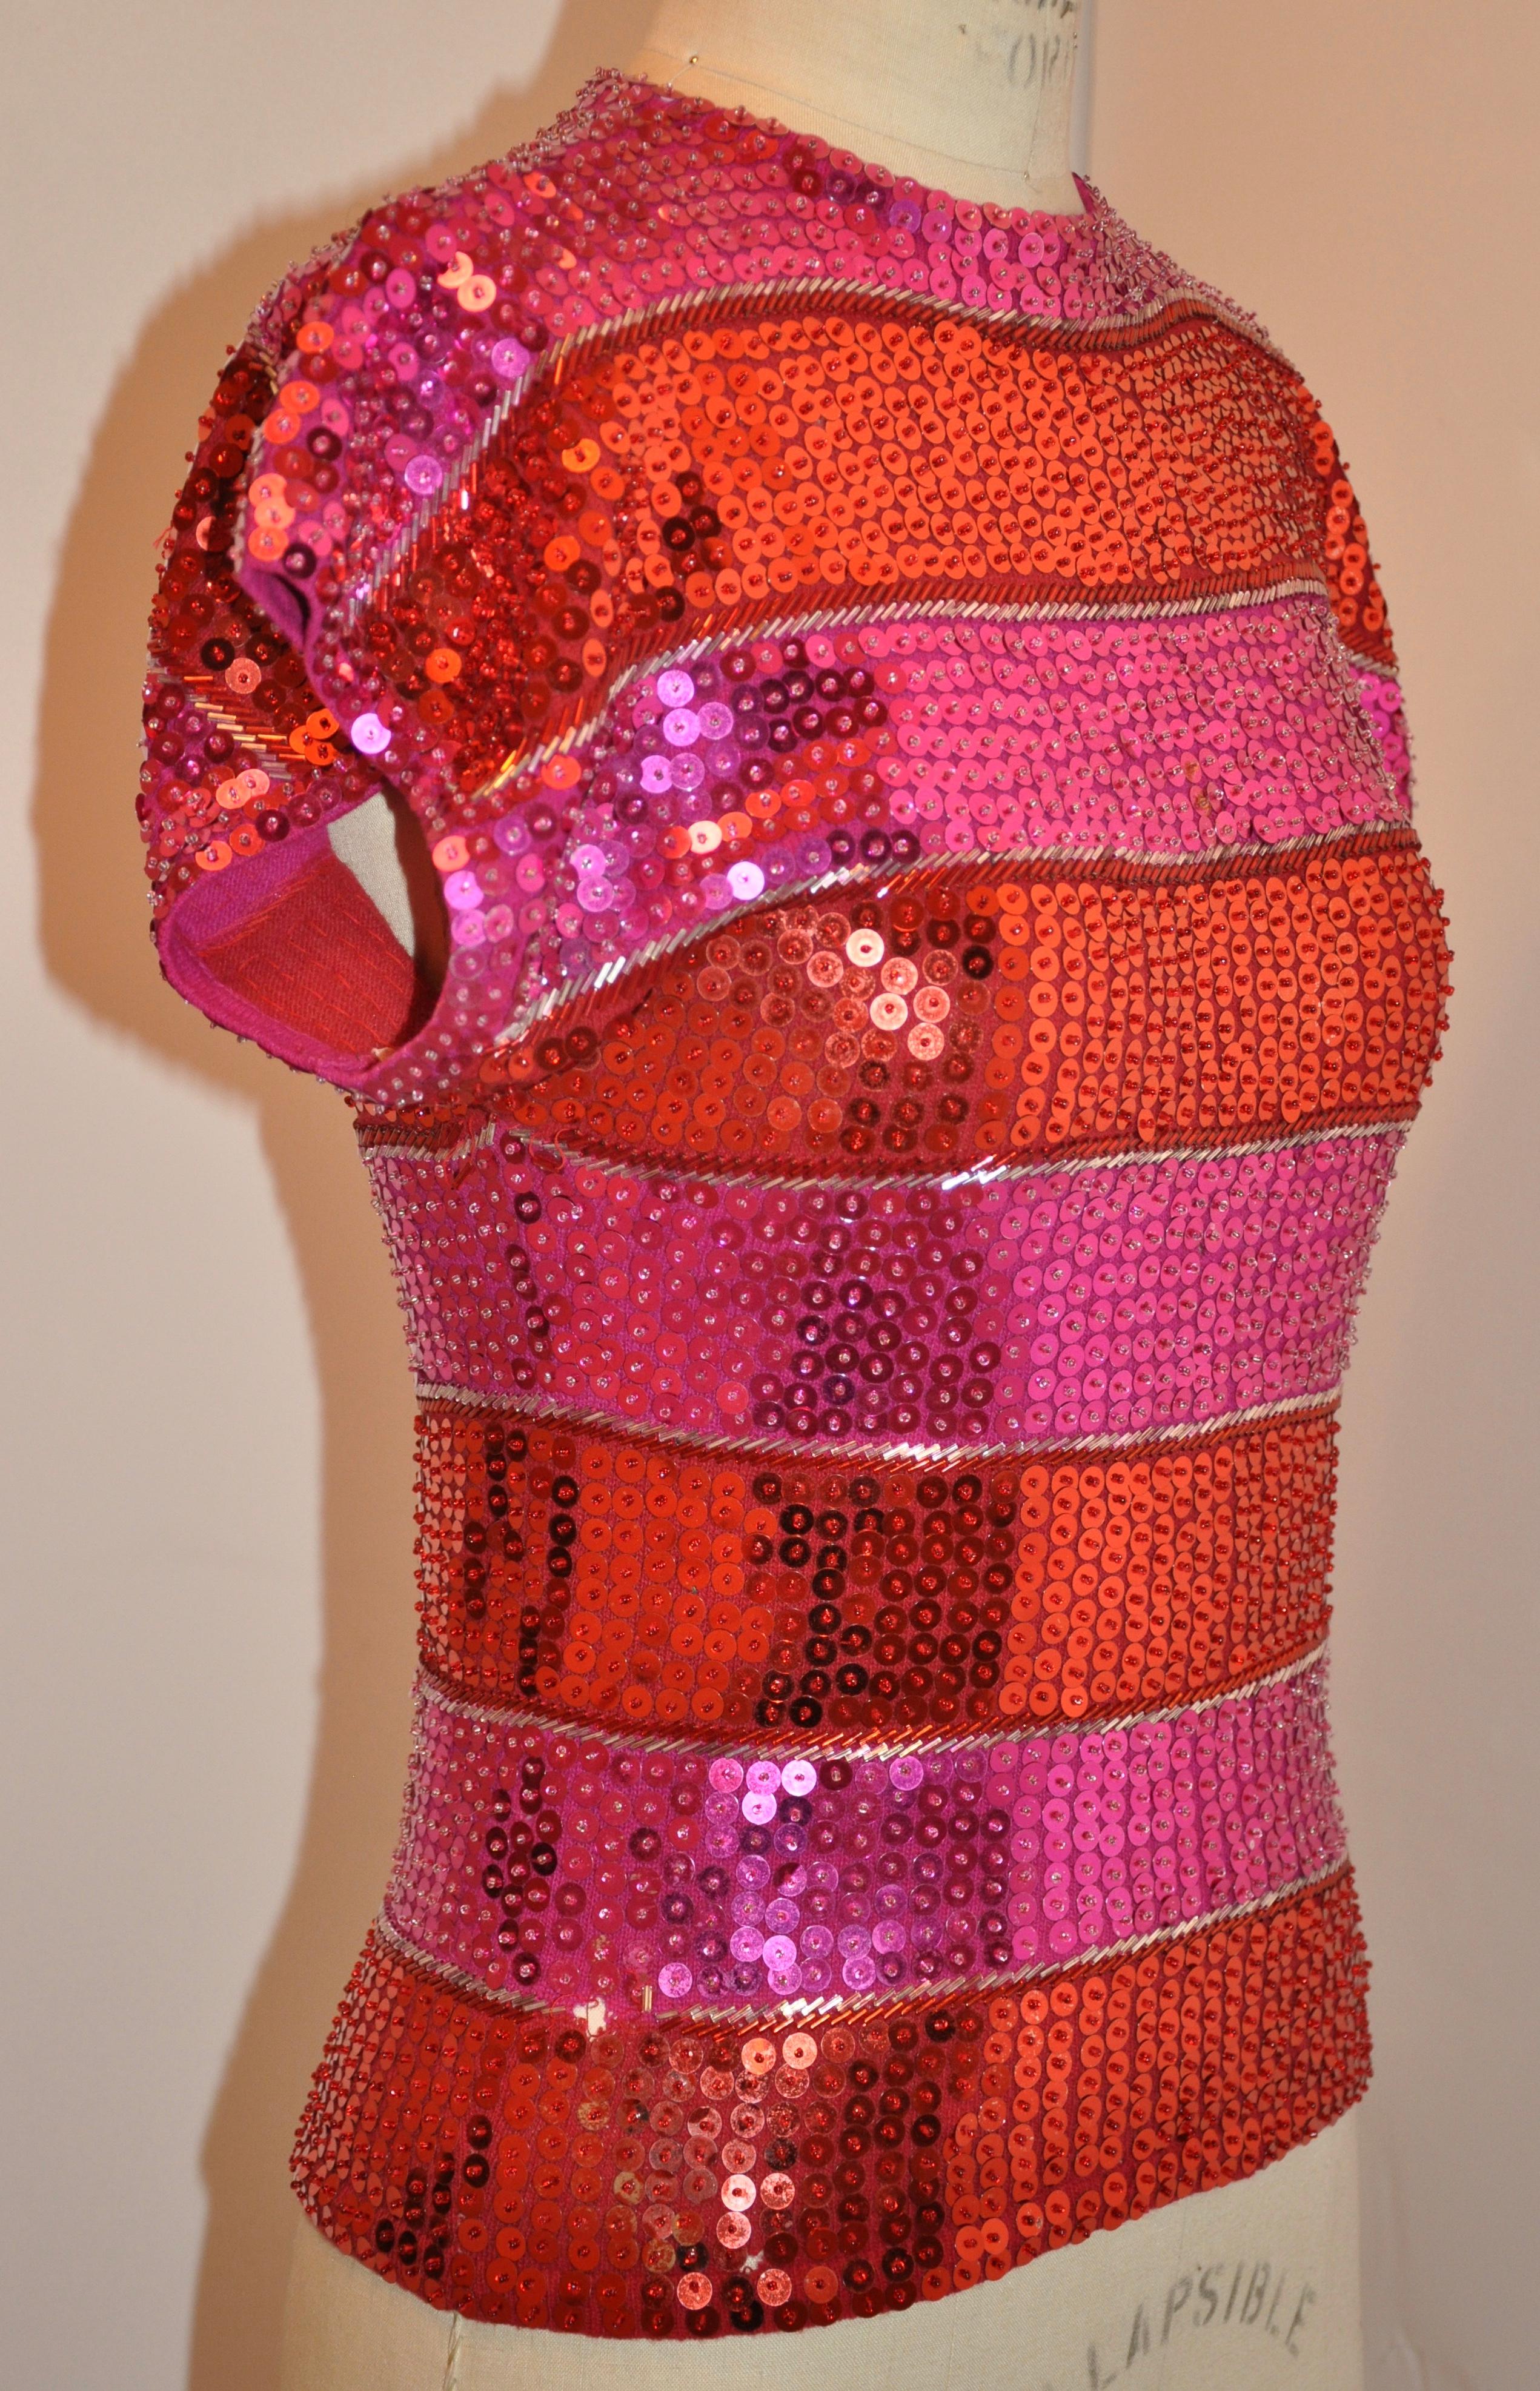    Cathy Hardwick eye-popping body-hugging fuchsia & red sequined sweater made of lambswool and nylon blend is accented with stripes of sequined bugle beads in-between. Measurements taken at 